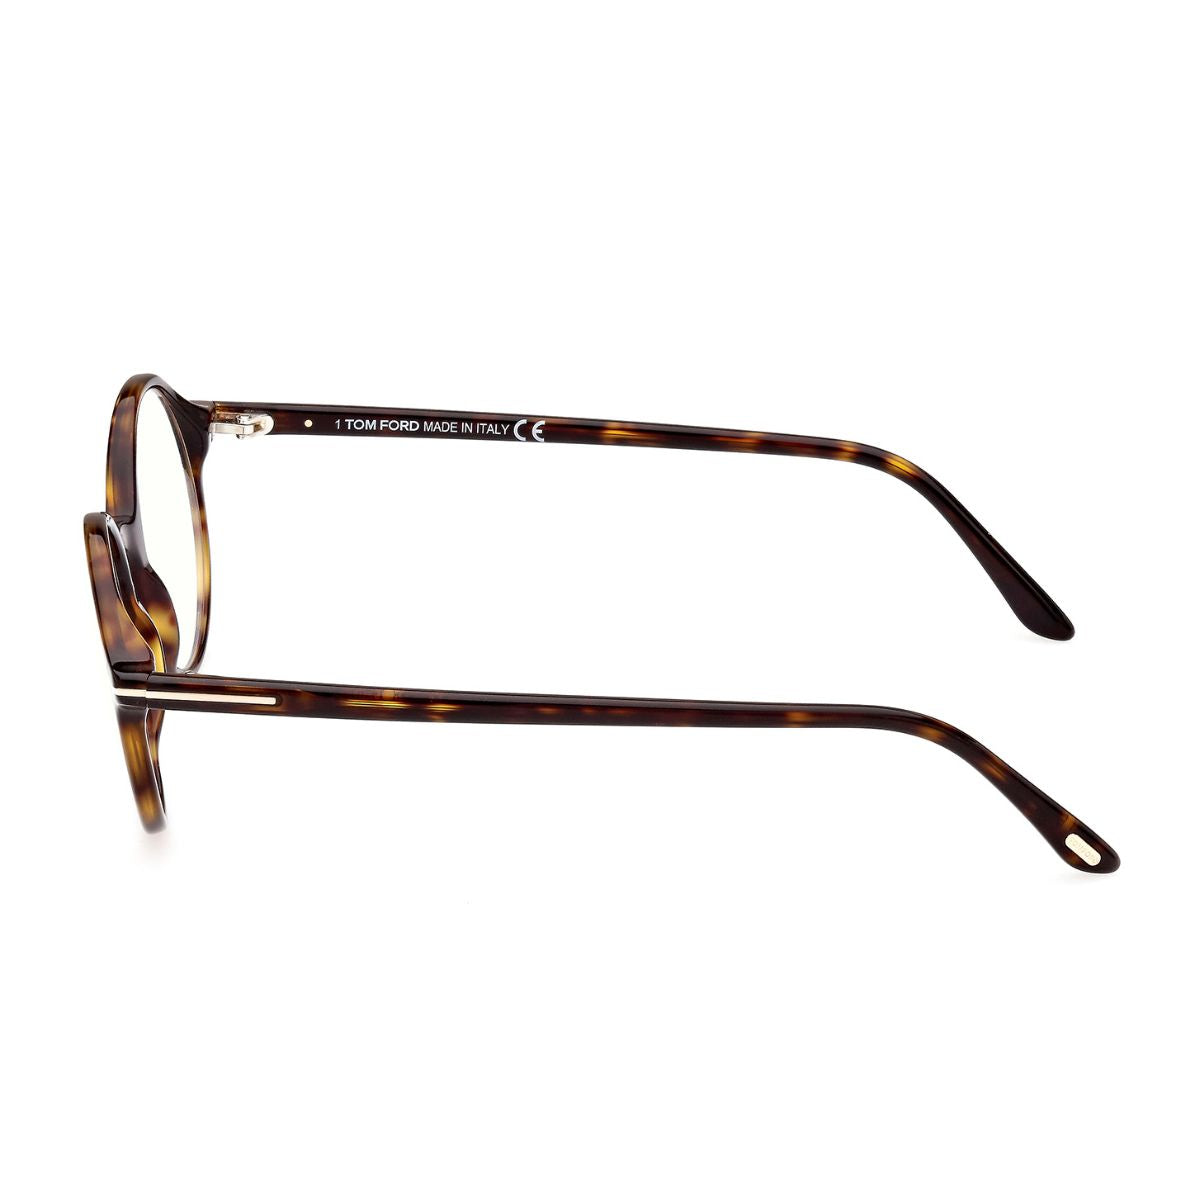 "Stylish Rounded Tom Ford Eyewear Glasses For Men's At Optorium"